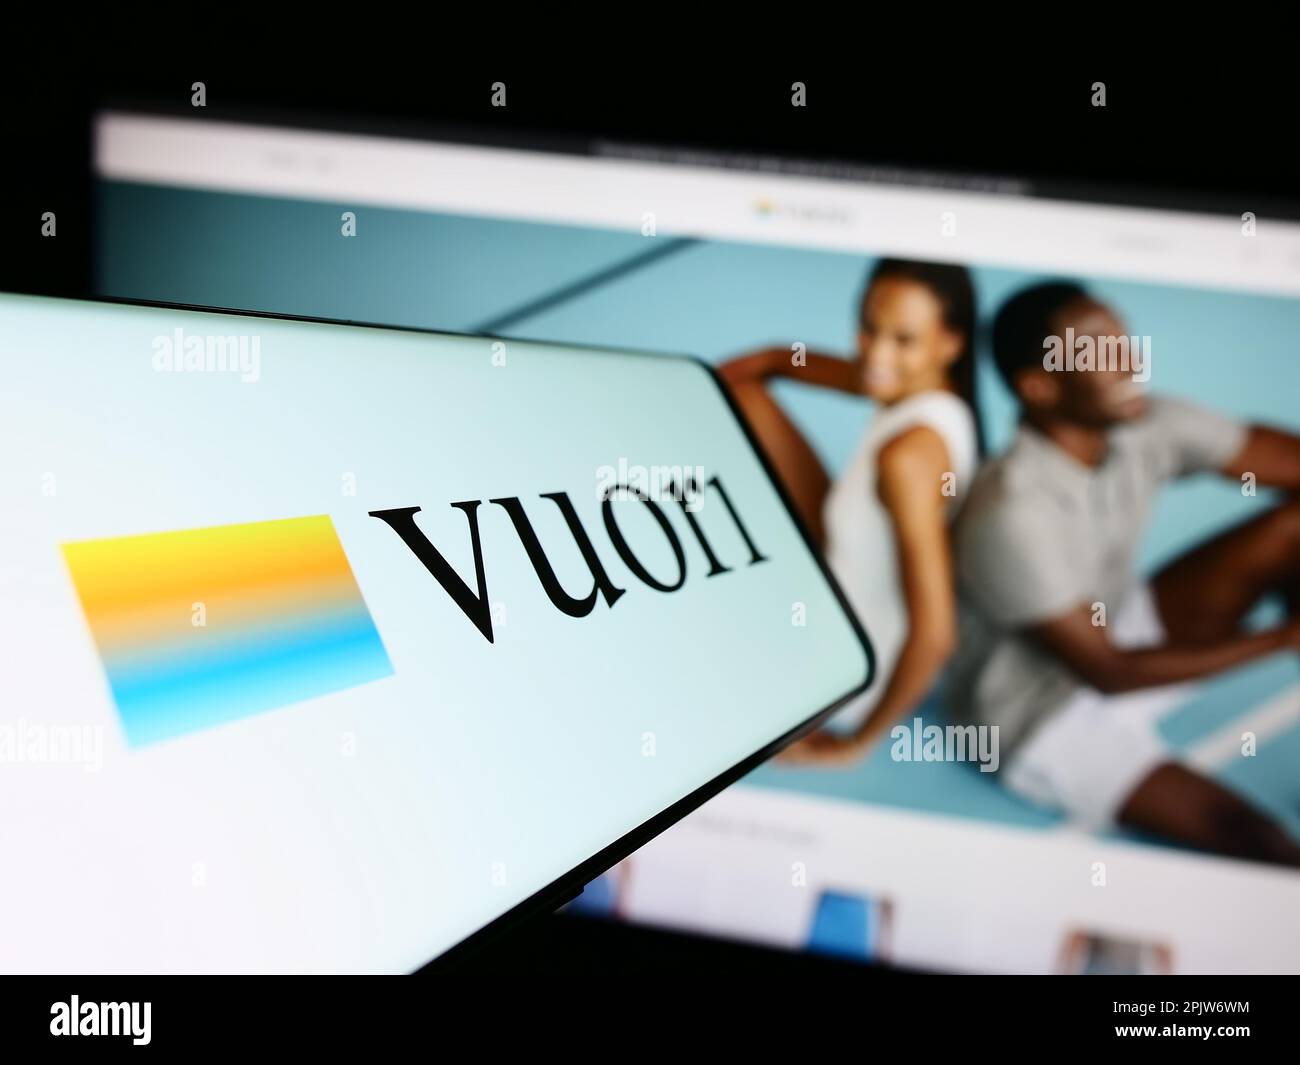 Cellphone with logo of American apparel e-commerce company Vuori Inc. on screen in front of website. Focus on center-left of phone display. Stock Photo